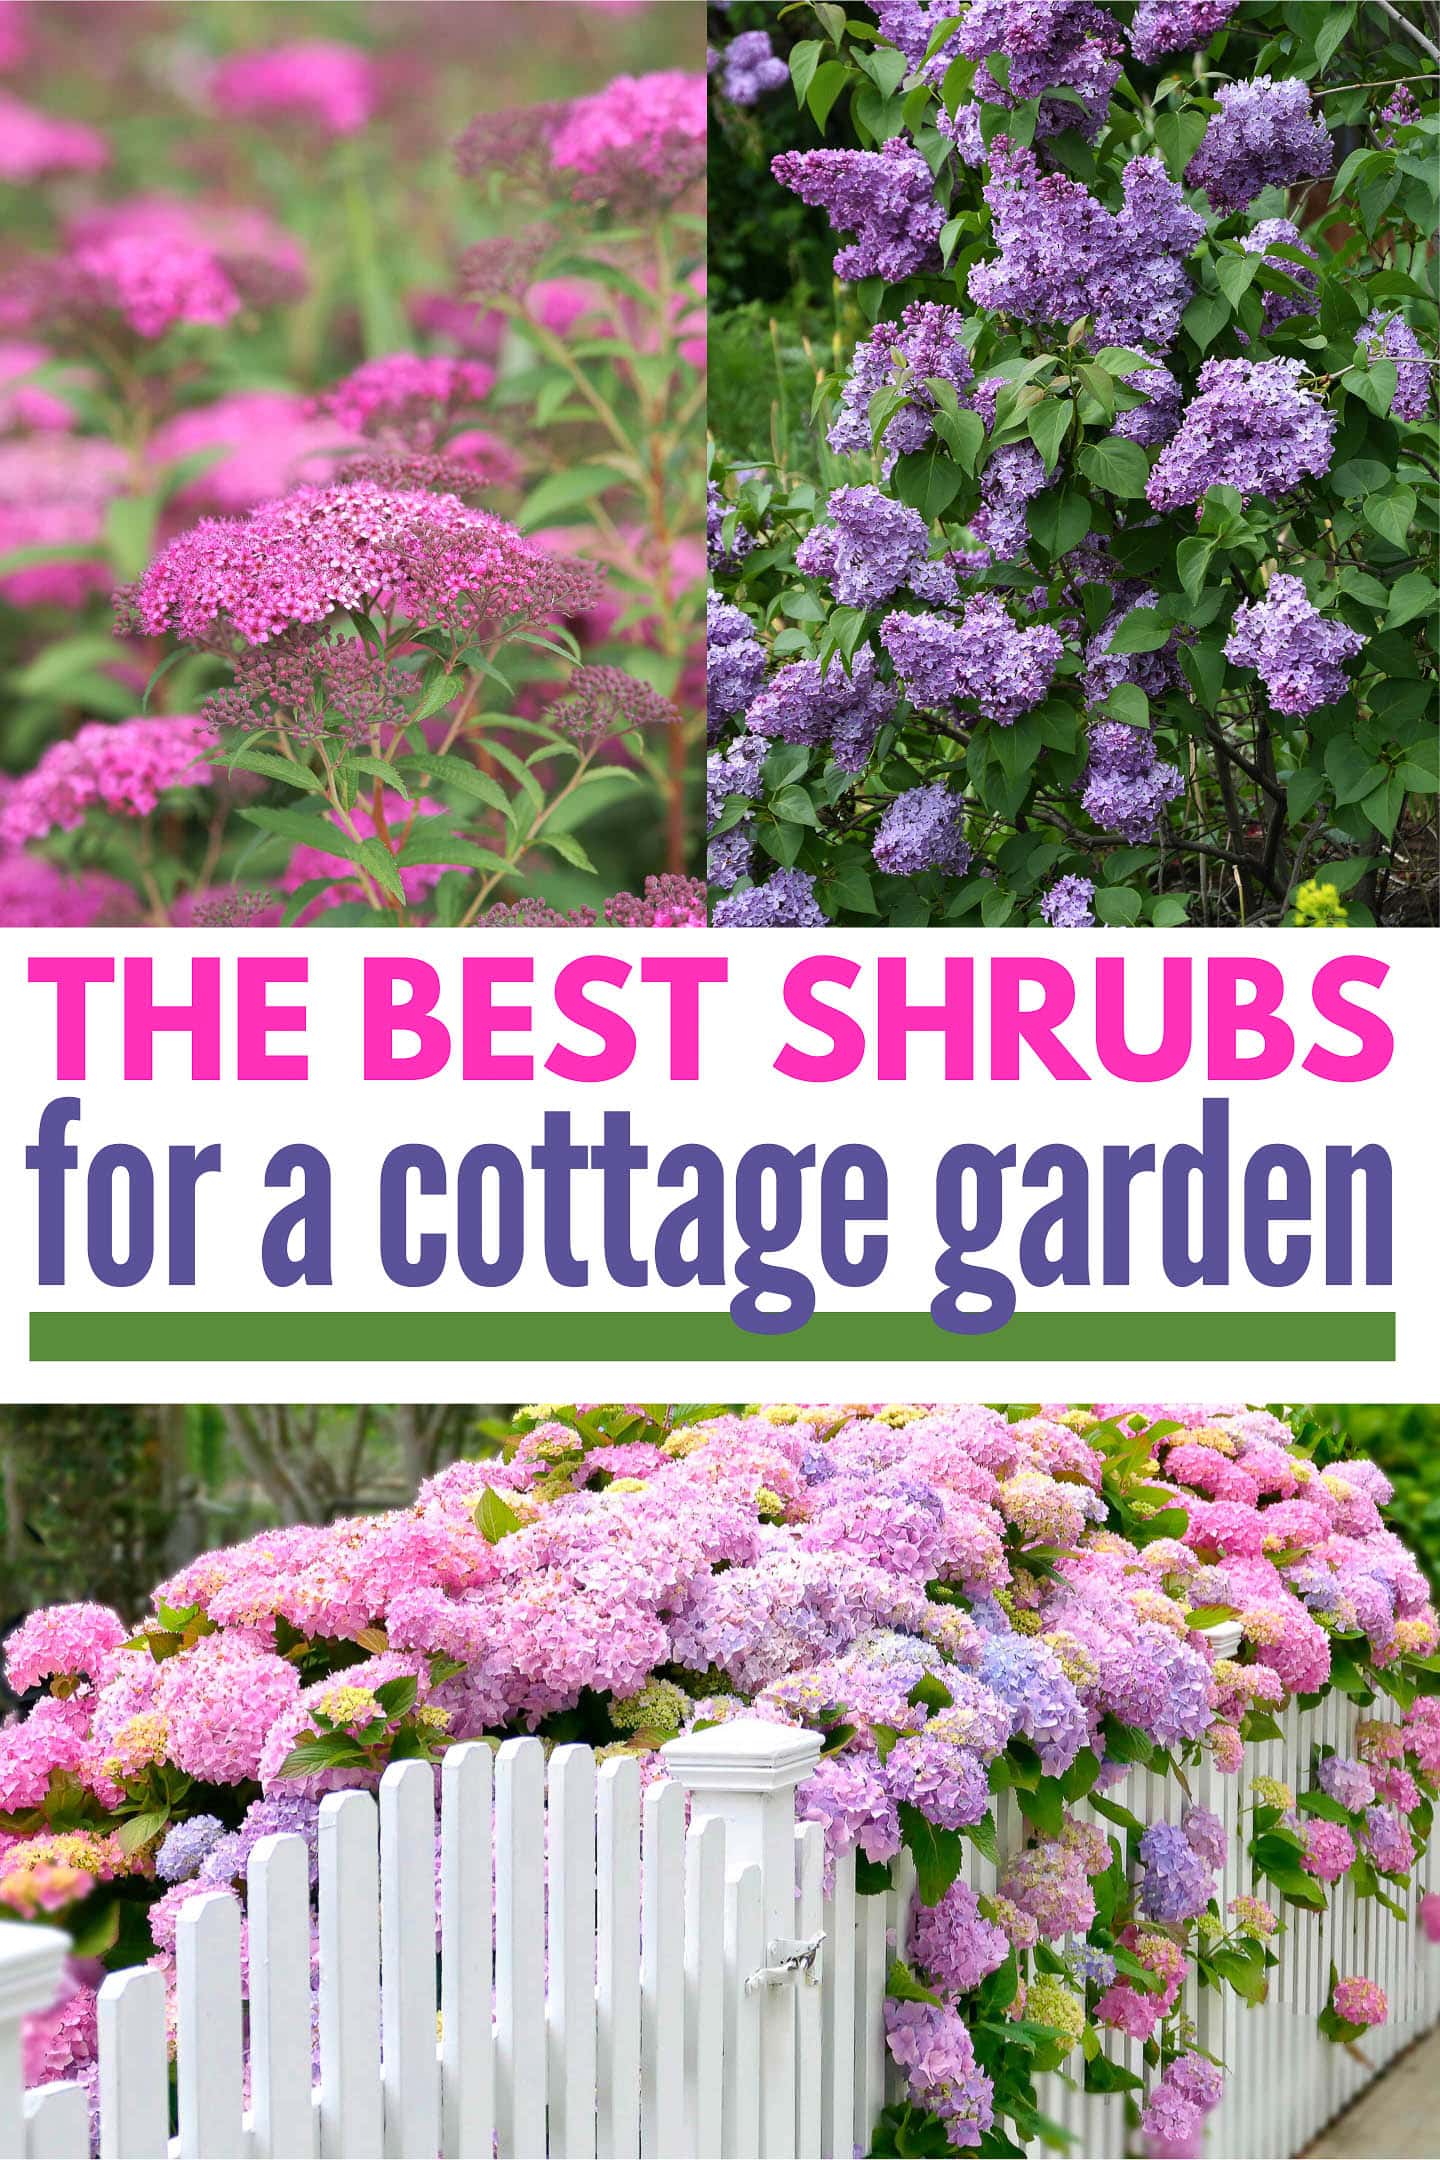 The best shrubs for a cottage garden, including Anthony Waterer spirea, lilacs and Hydrangea macrophylla